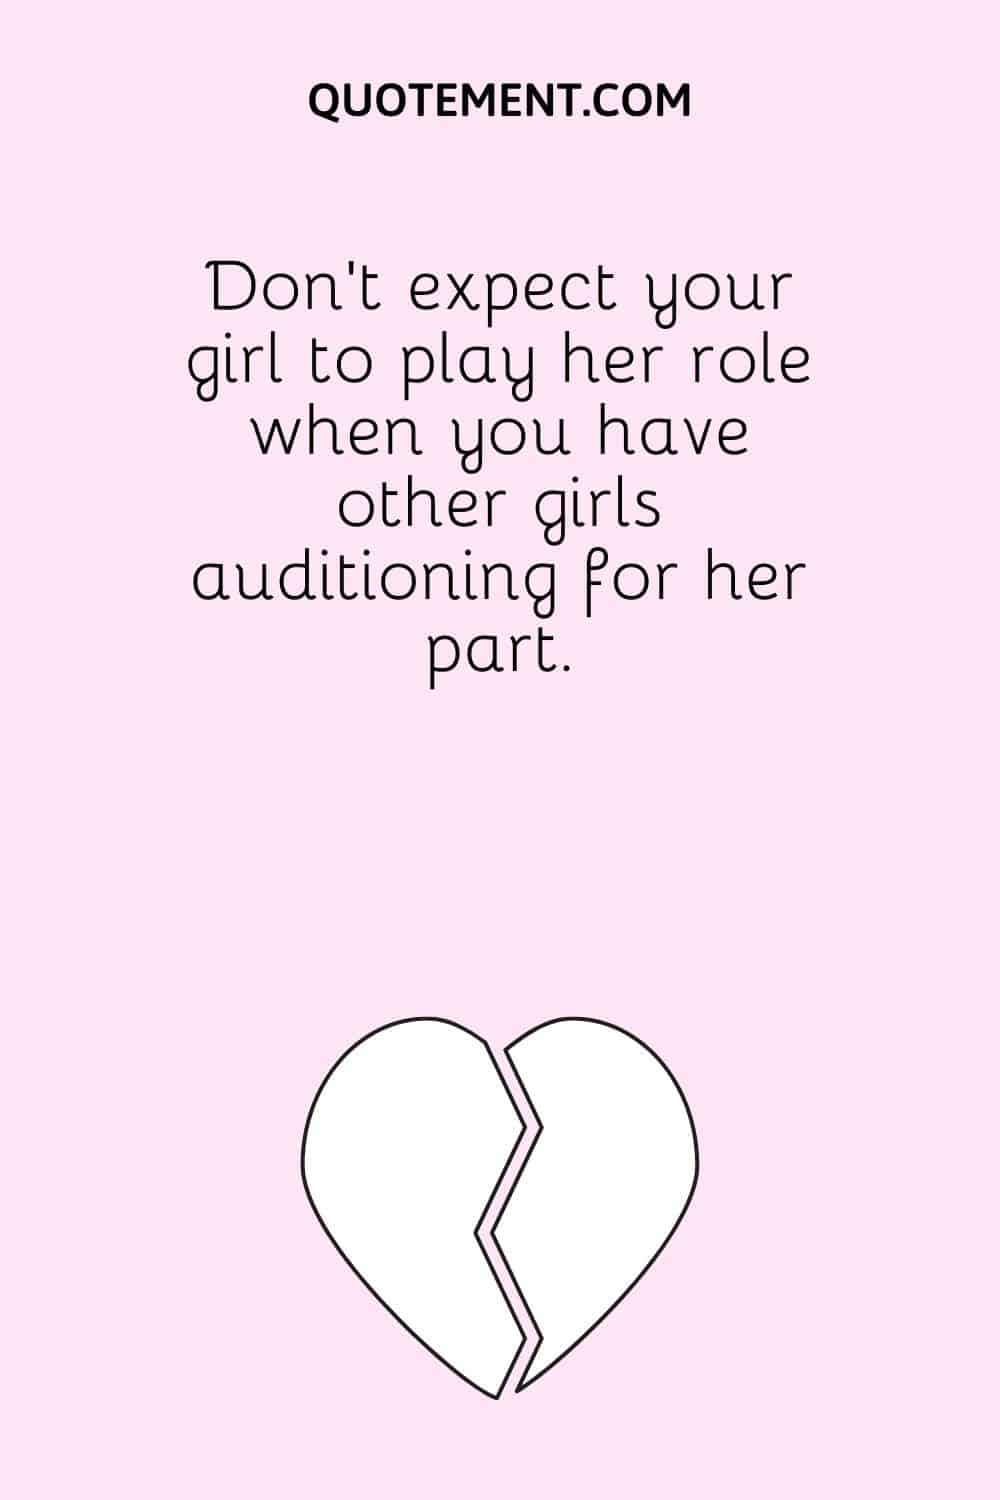 Don't expect your girl to play her role when you have other girls auditioning for her part.